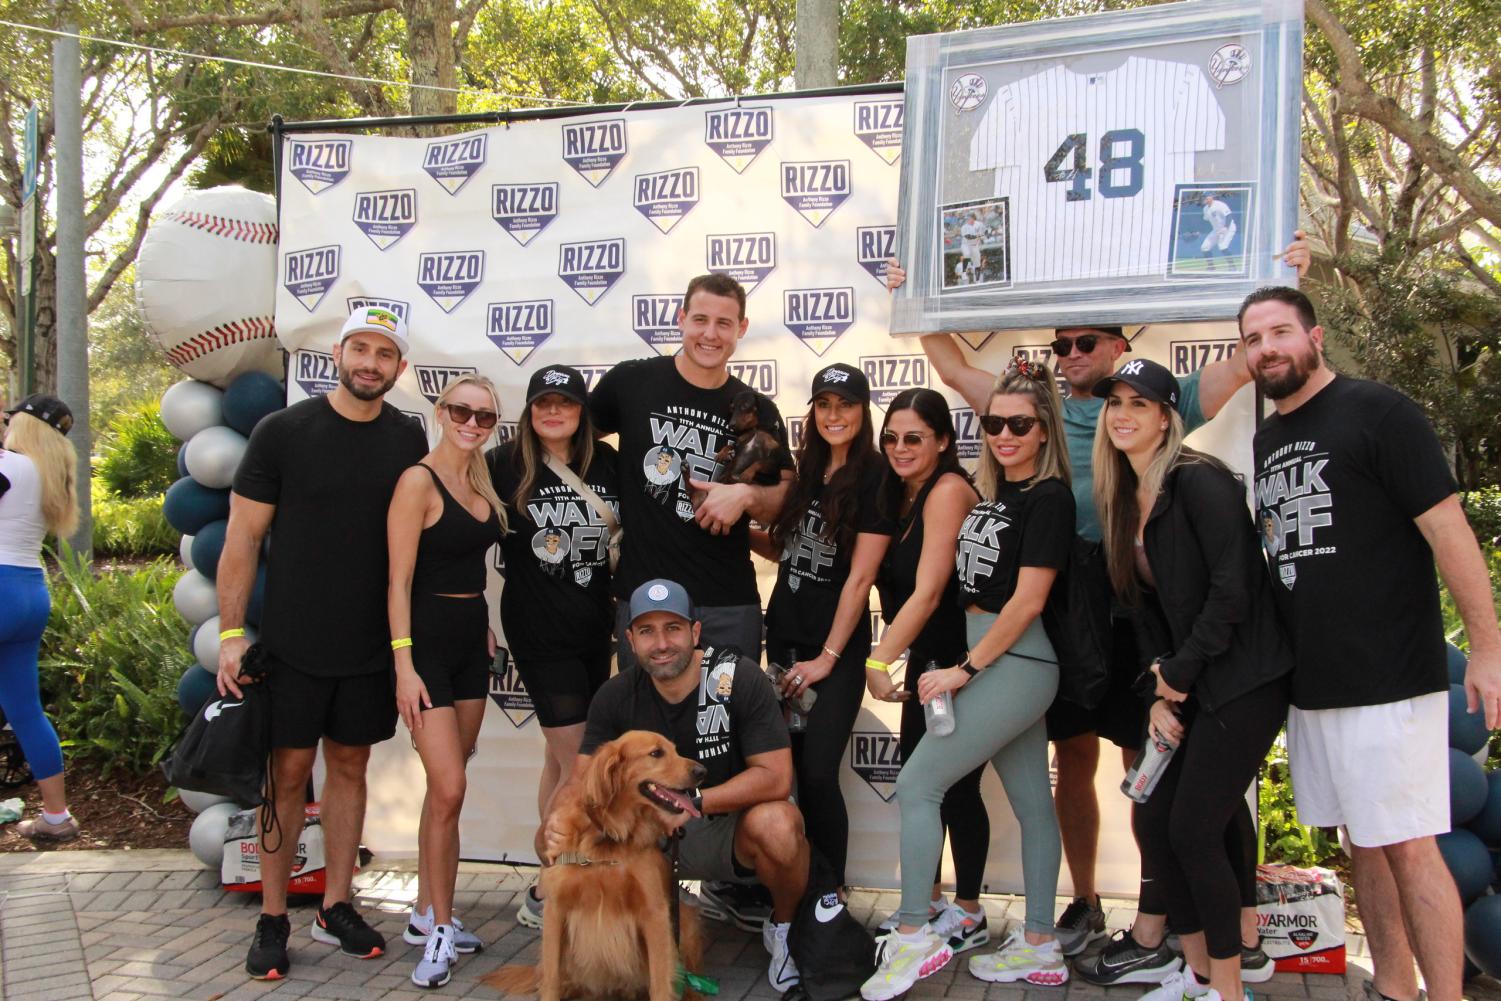 MSD alumni Anthony Rizzo hosts 11th Annual Walk-Off for Cancer and raises  over $1.2 million – Eagle Eye News